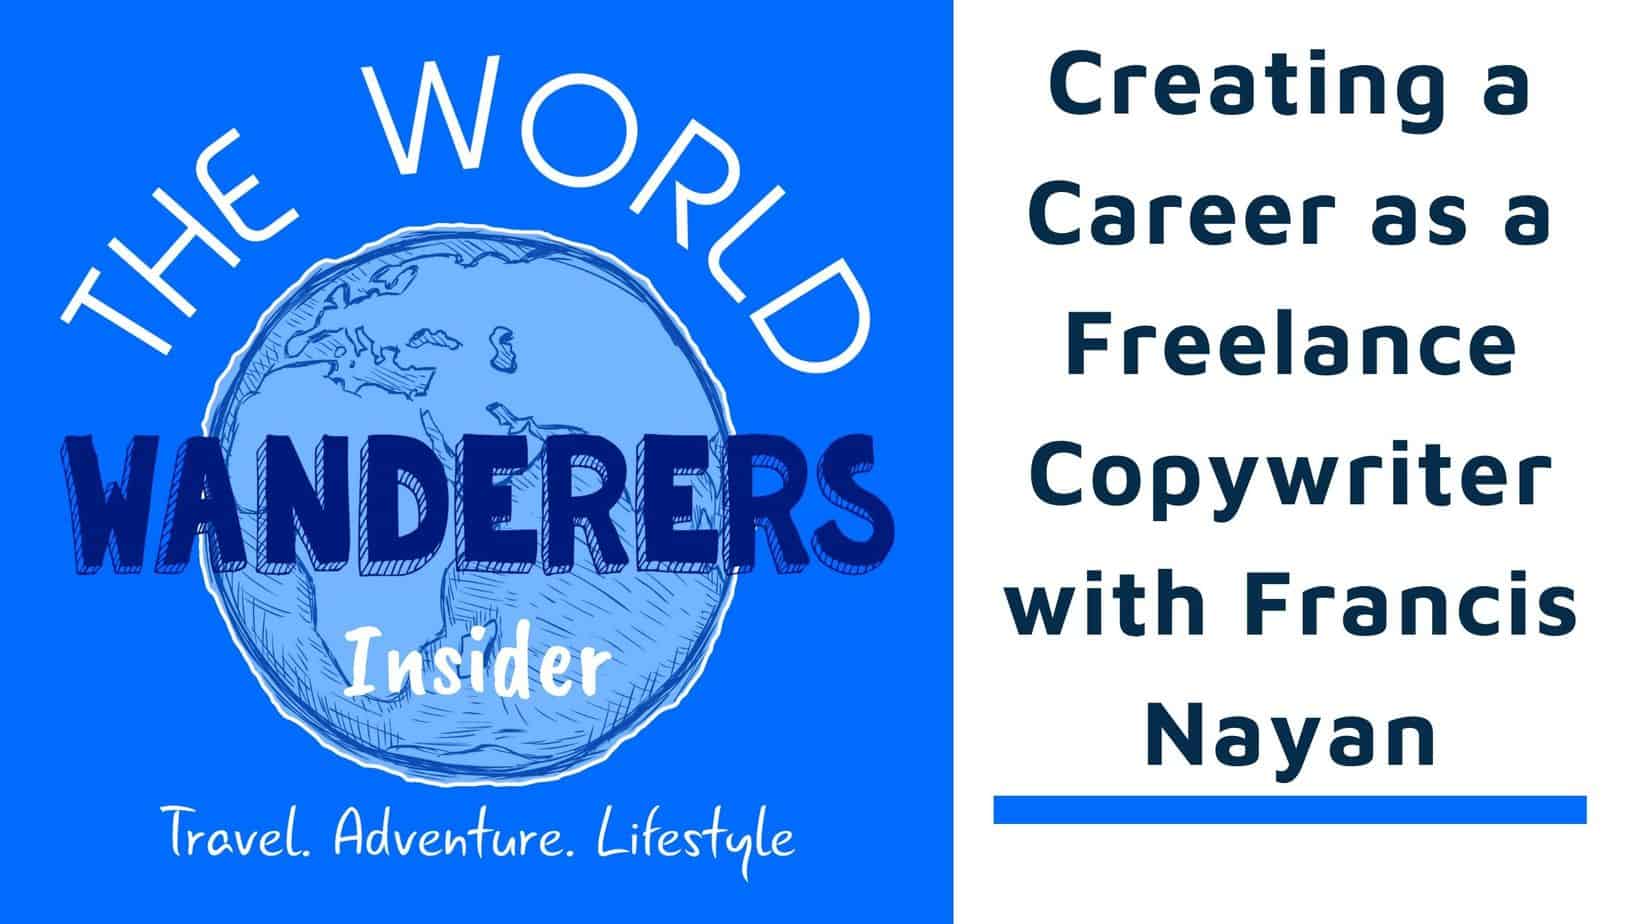 Insider Podcast: Creating a Career as a Freelance Copywriter with Francis Nayan